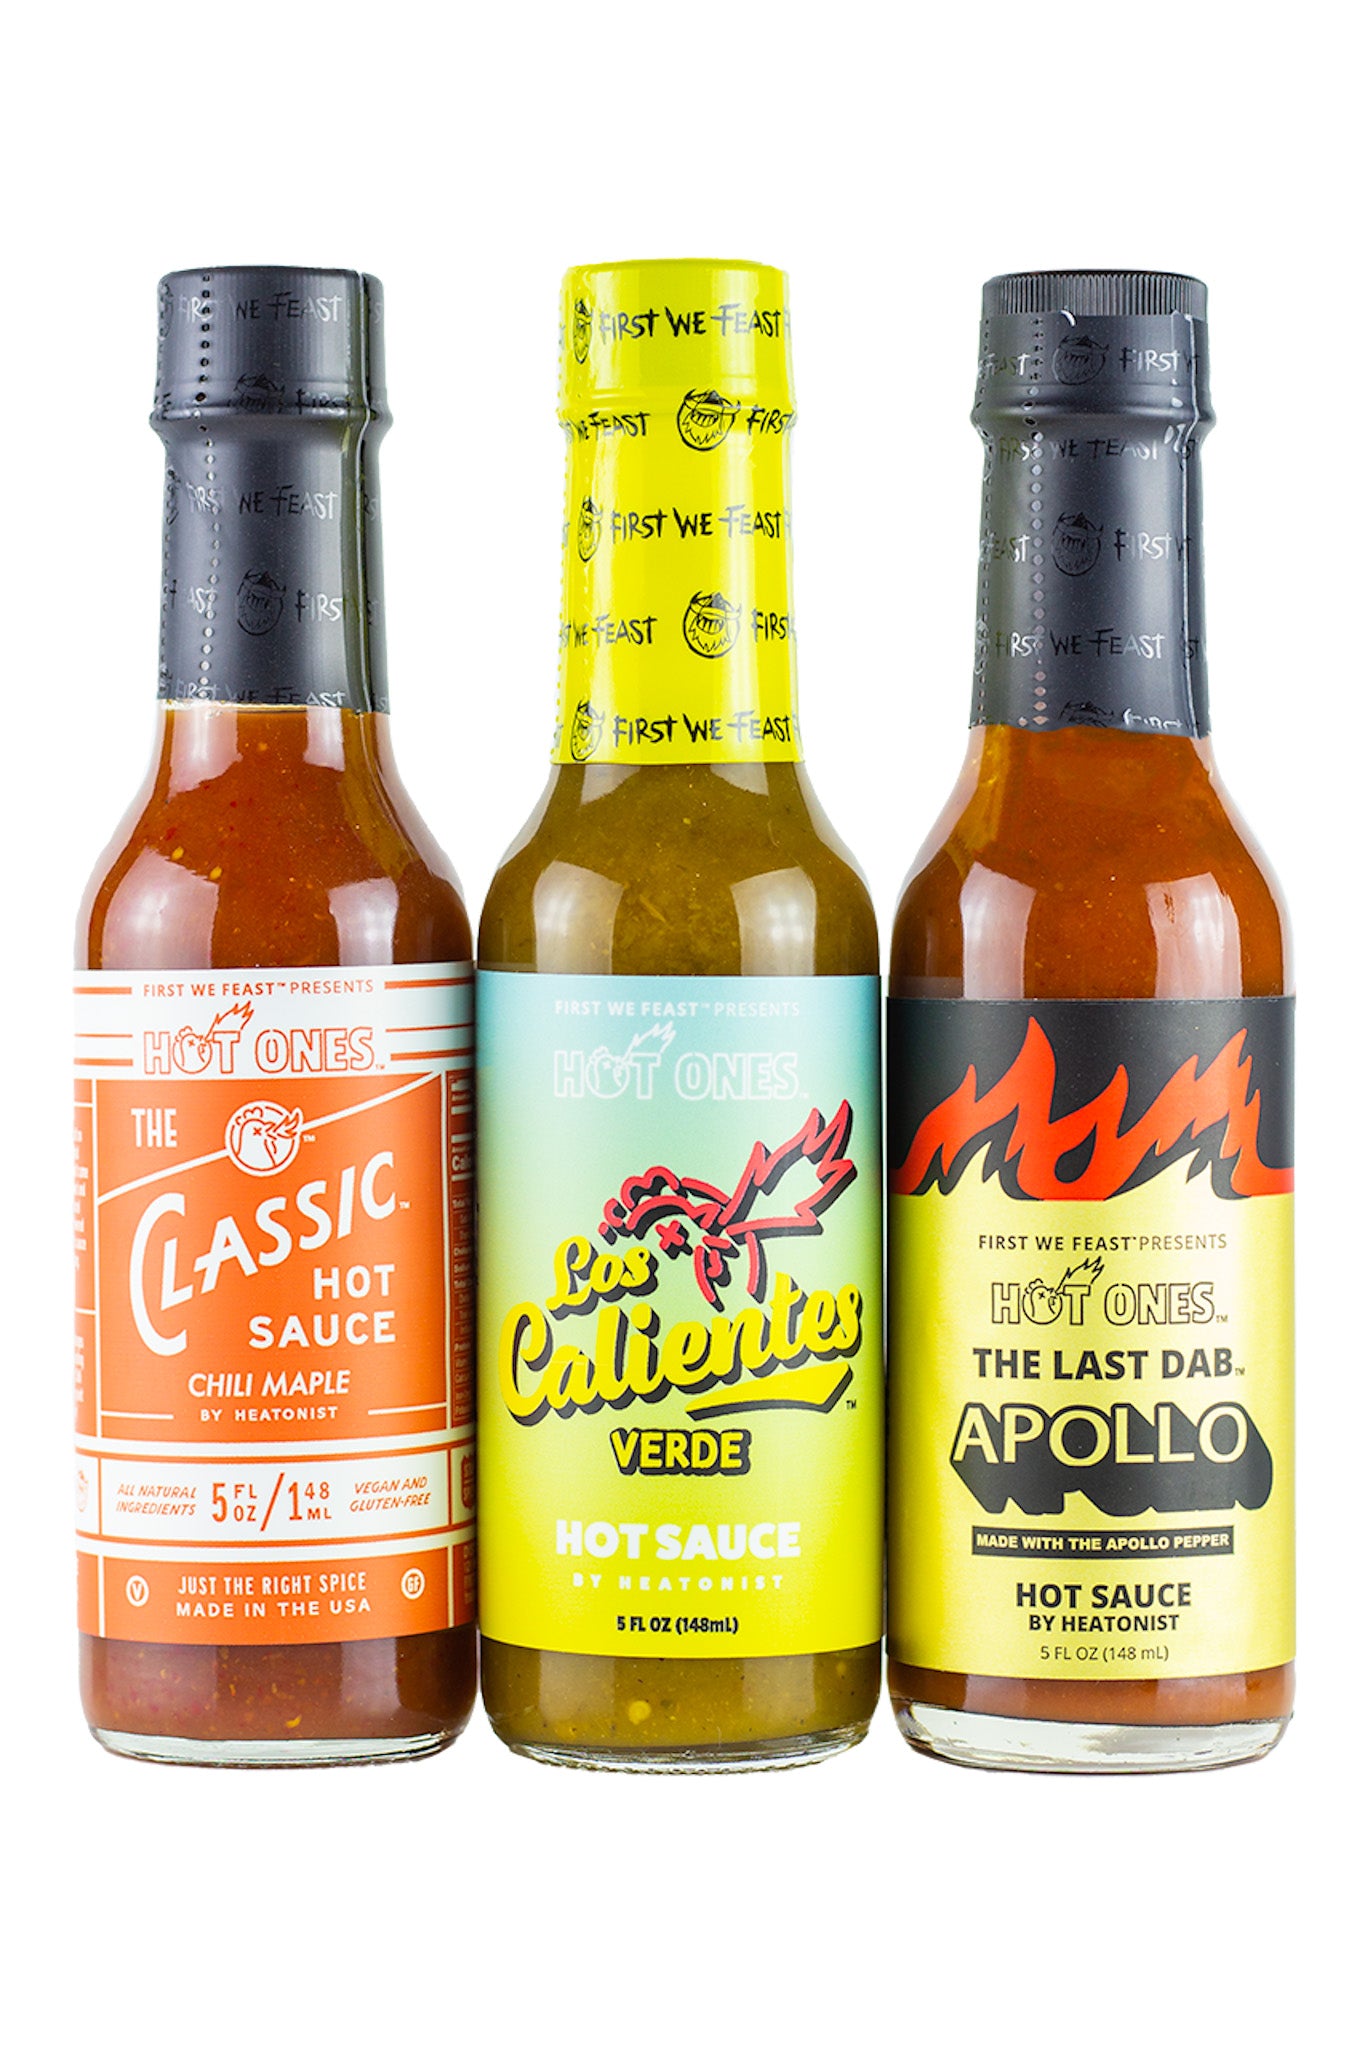 Hot Ones The Classic 3pk - Chilly Chiles